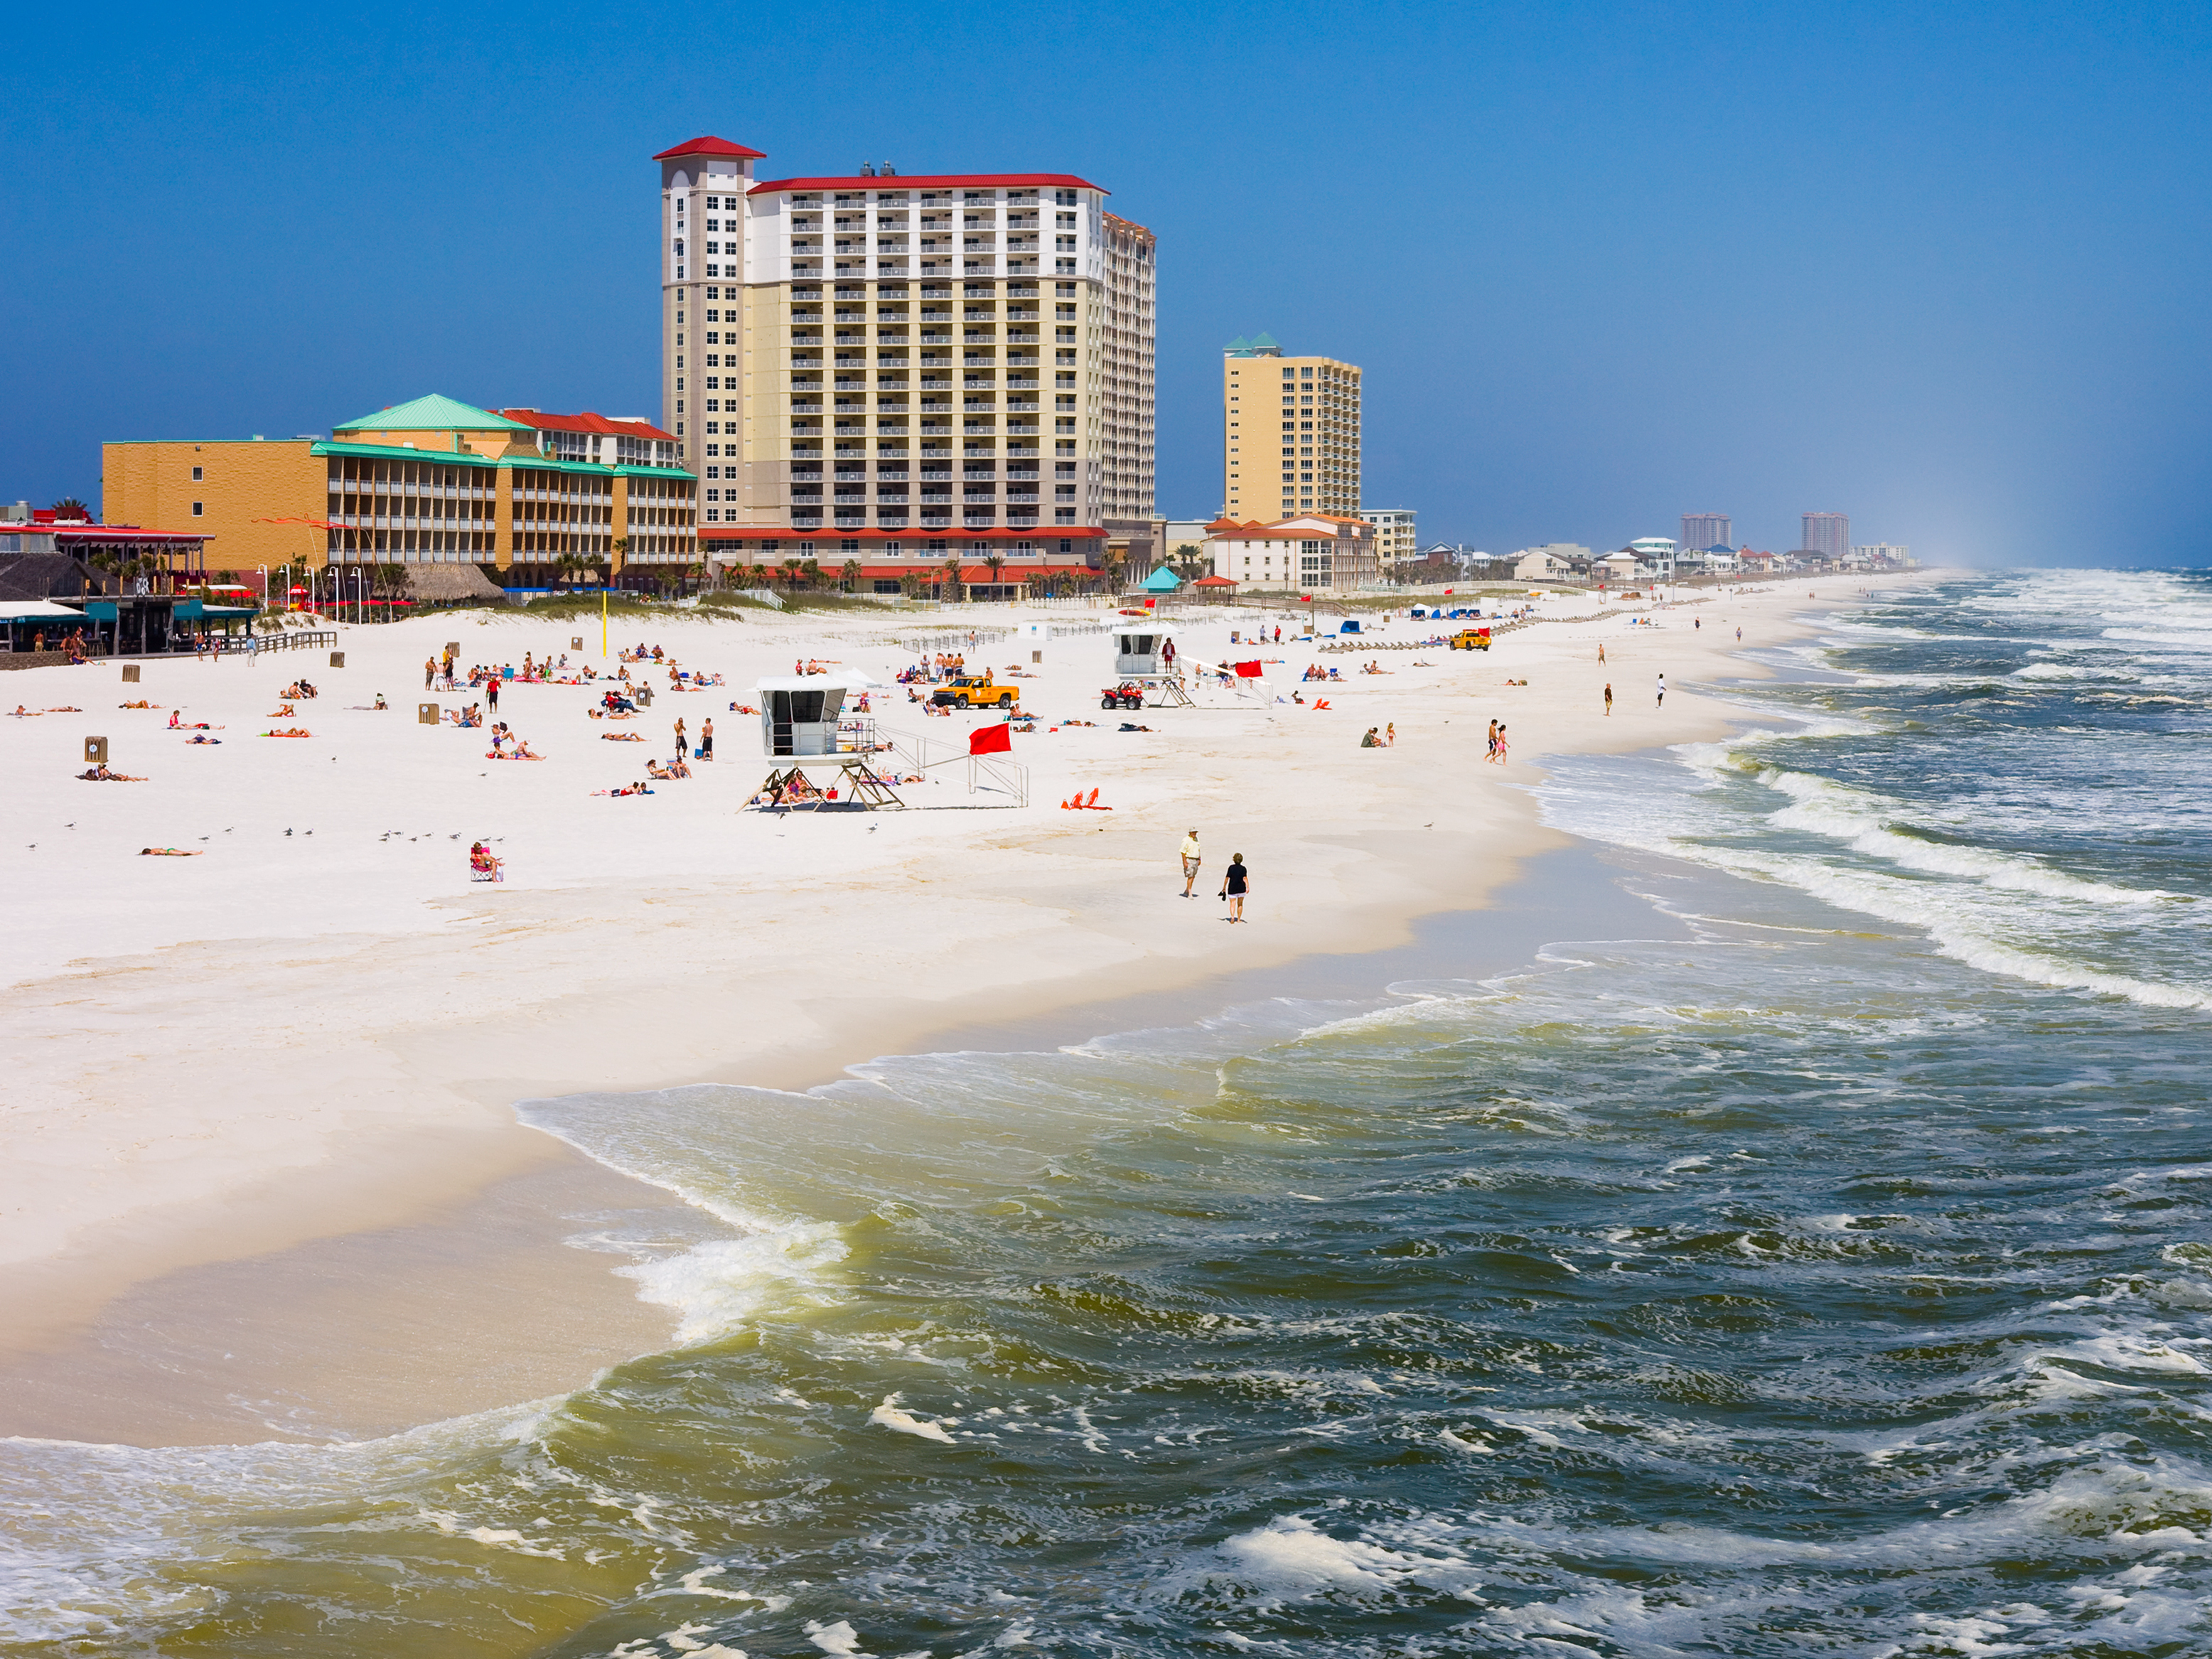 The 10 most affordable places to own a home on the beach in the US ...